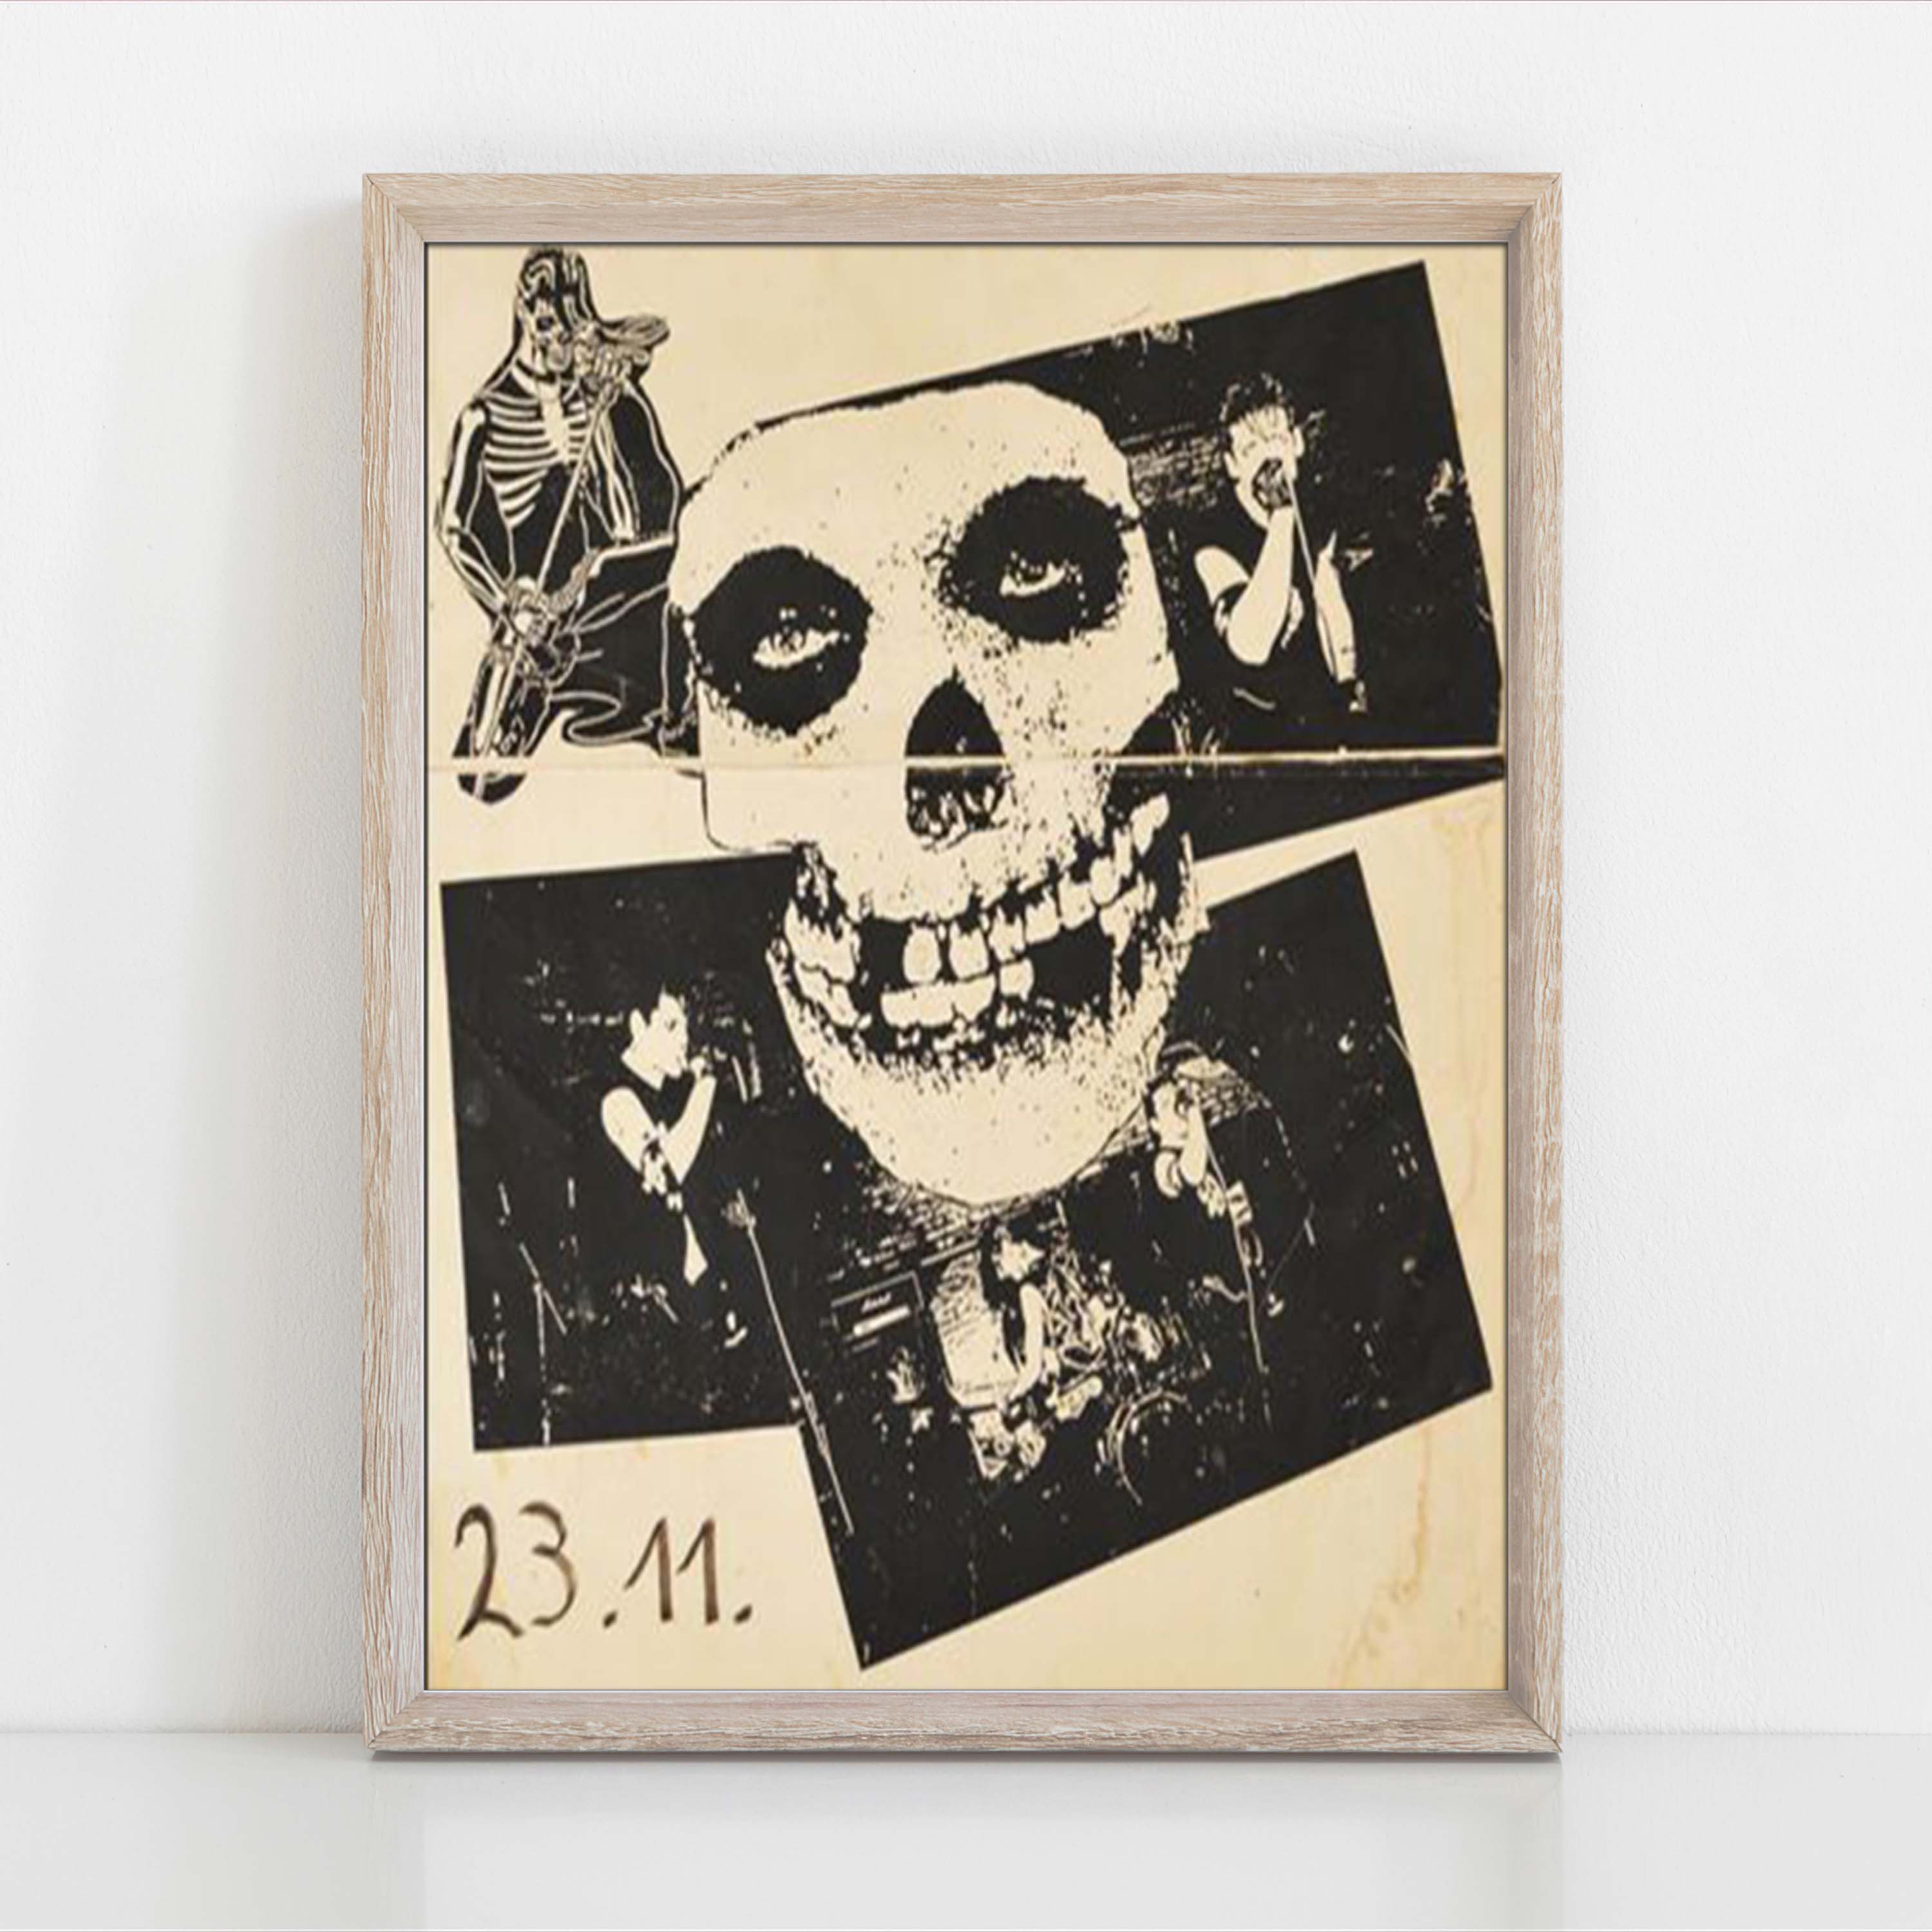 Skull and Crossbones Our beautiful pictures are available as Framed Prints,  Photos, Wall Art and Photo Gifts